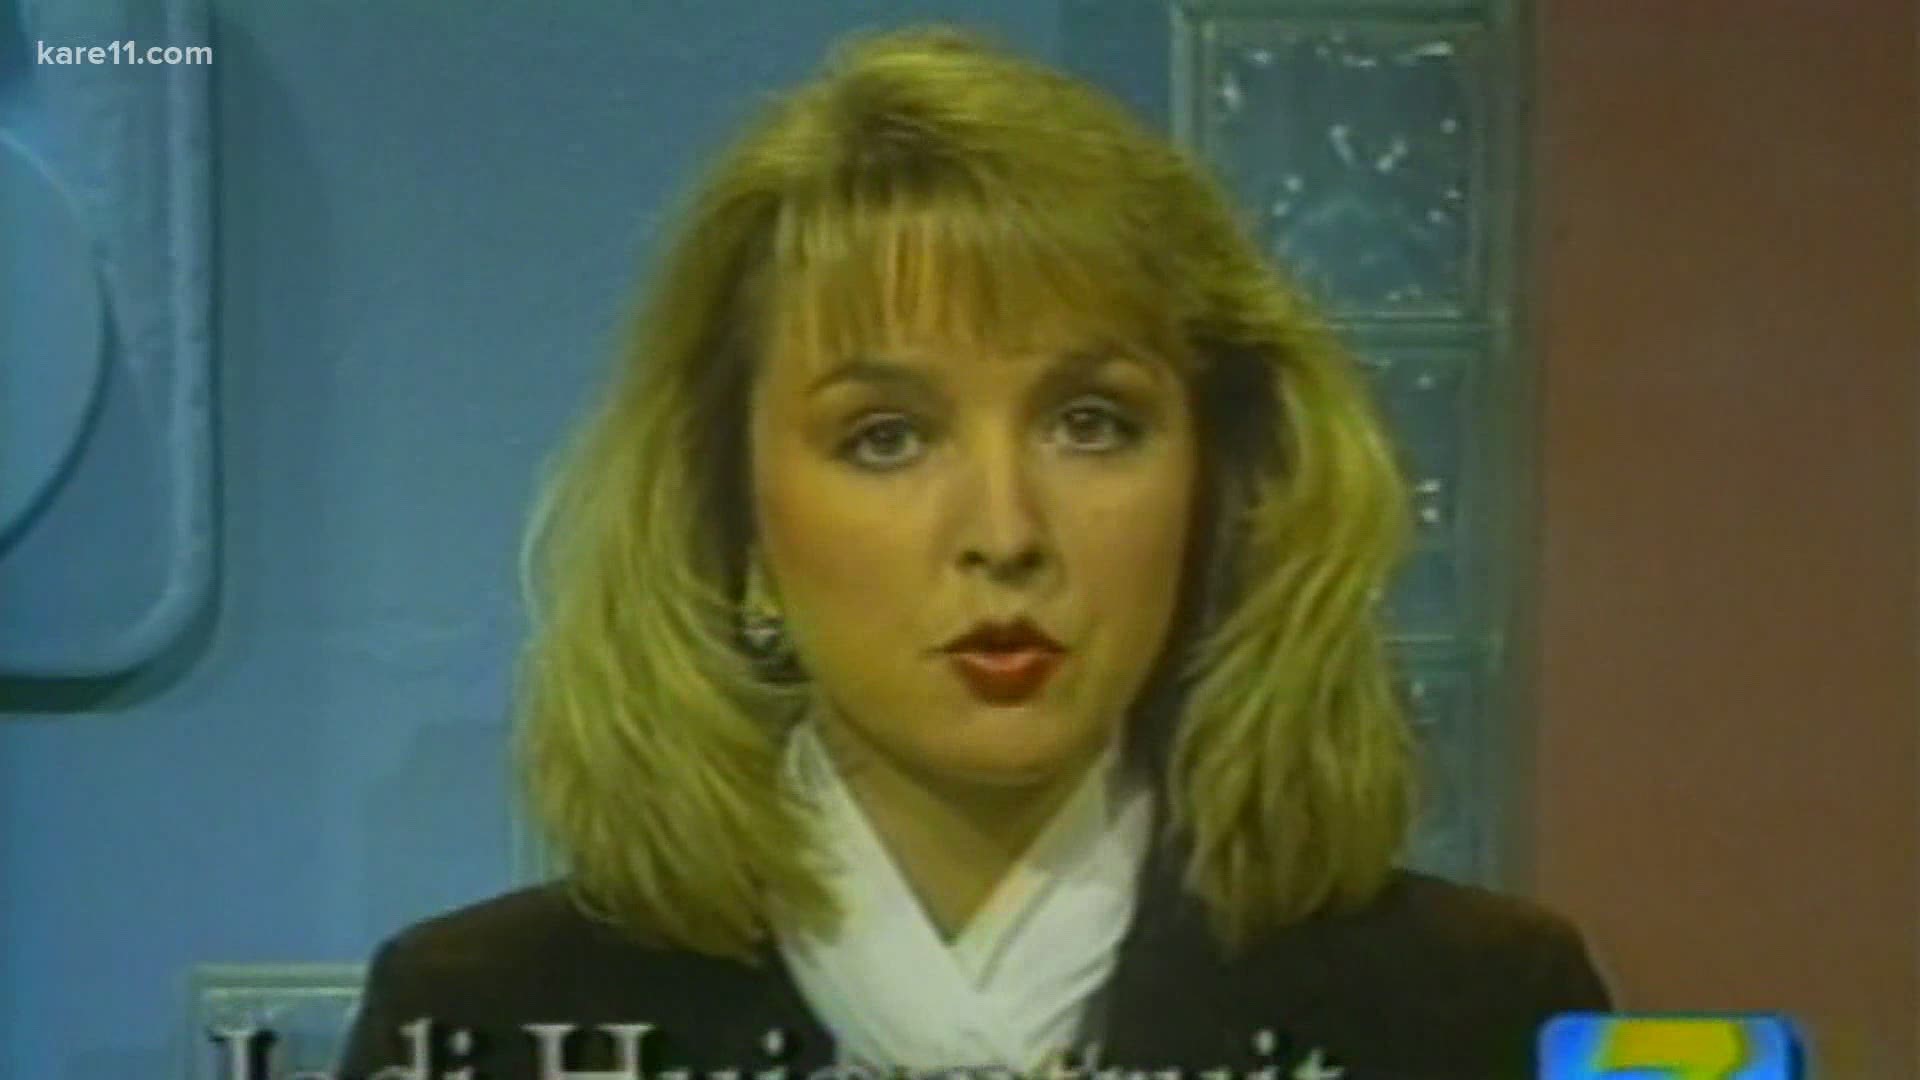 The news anchor disappeared on June 27, 1995 after she didn't show up to work at KIMT.